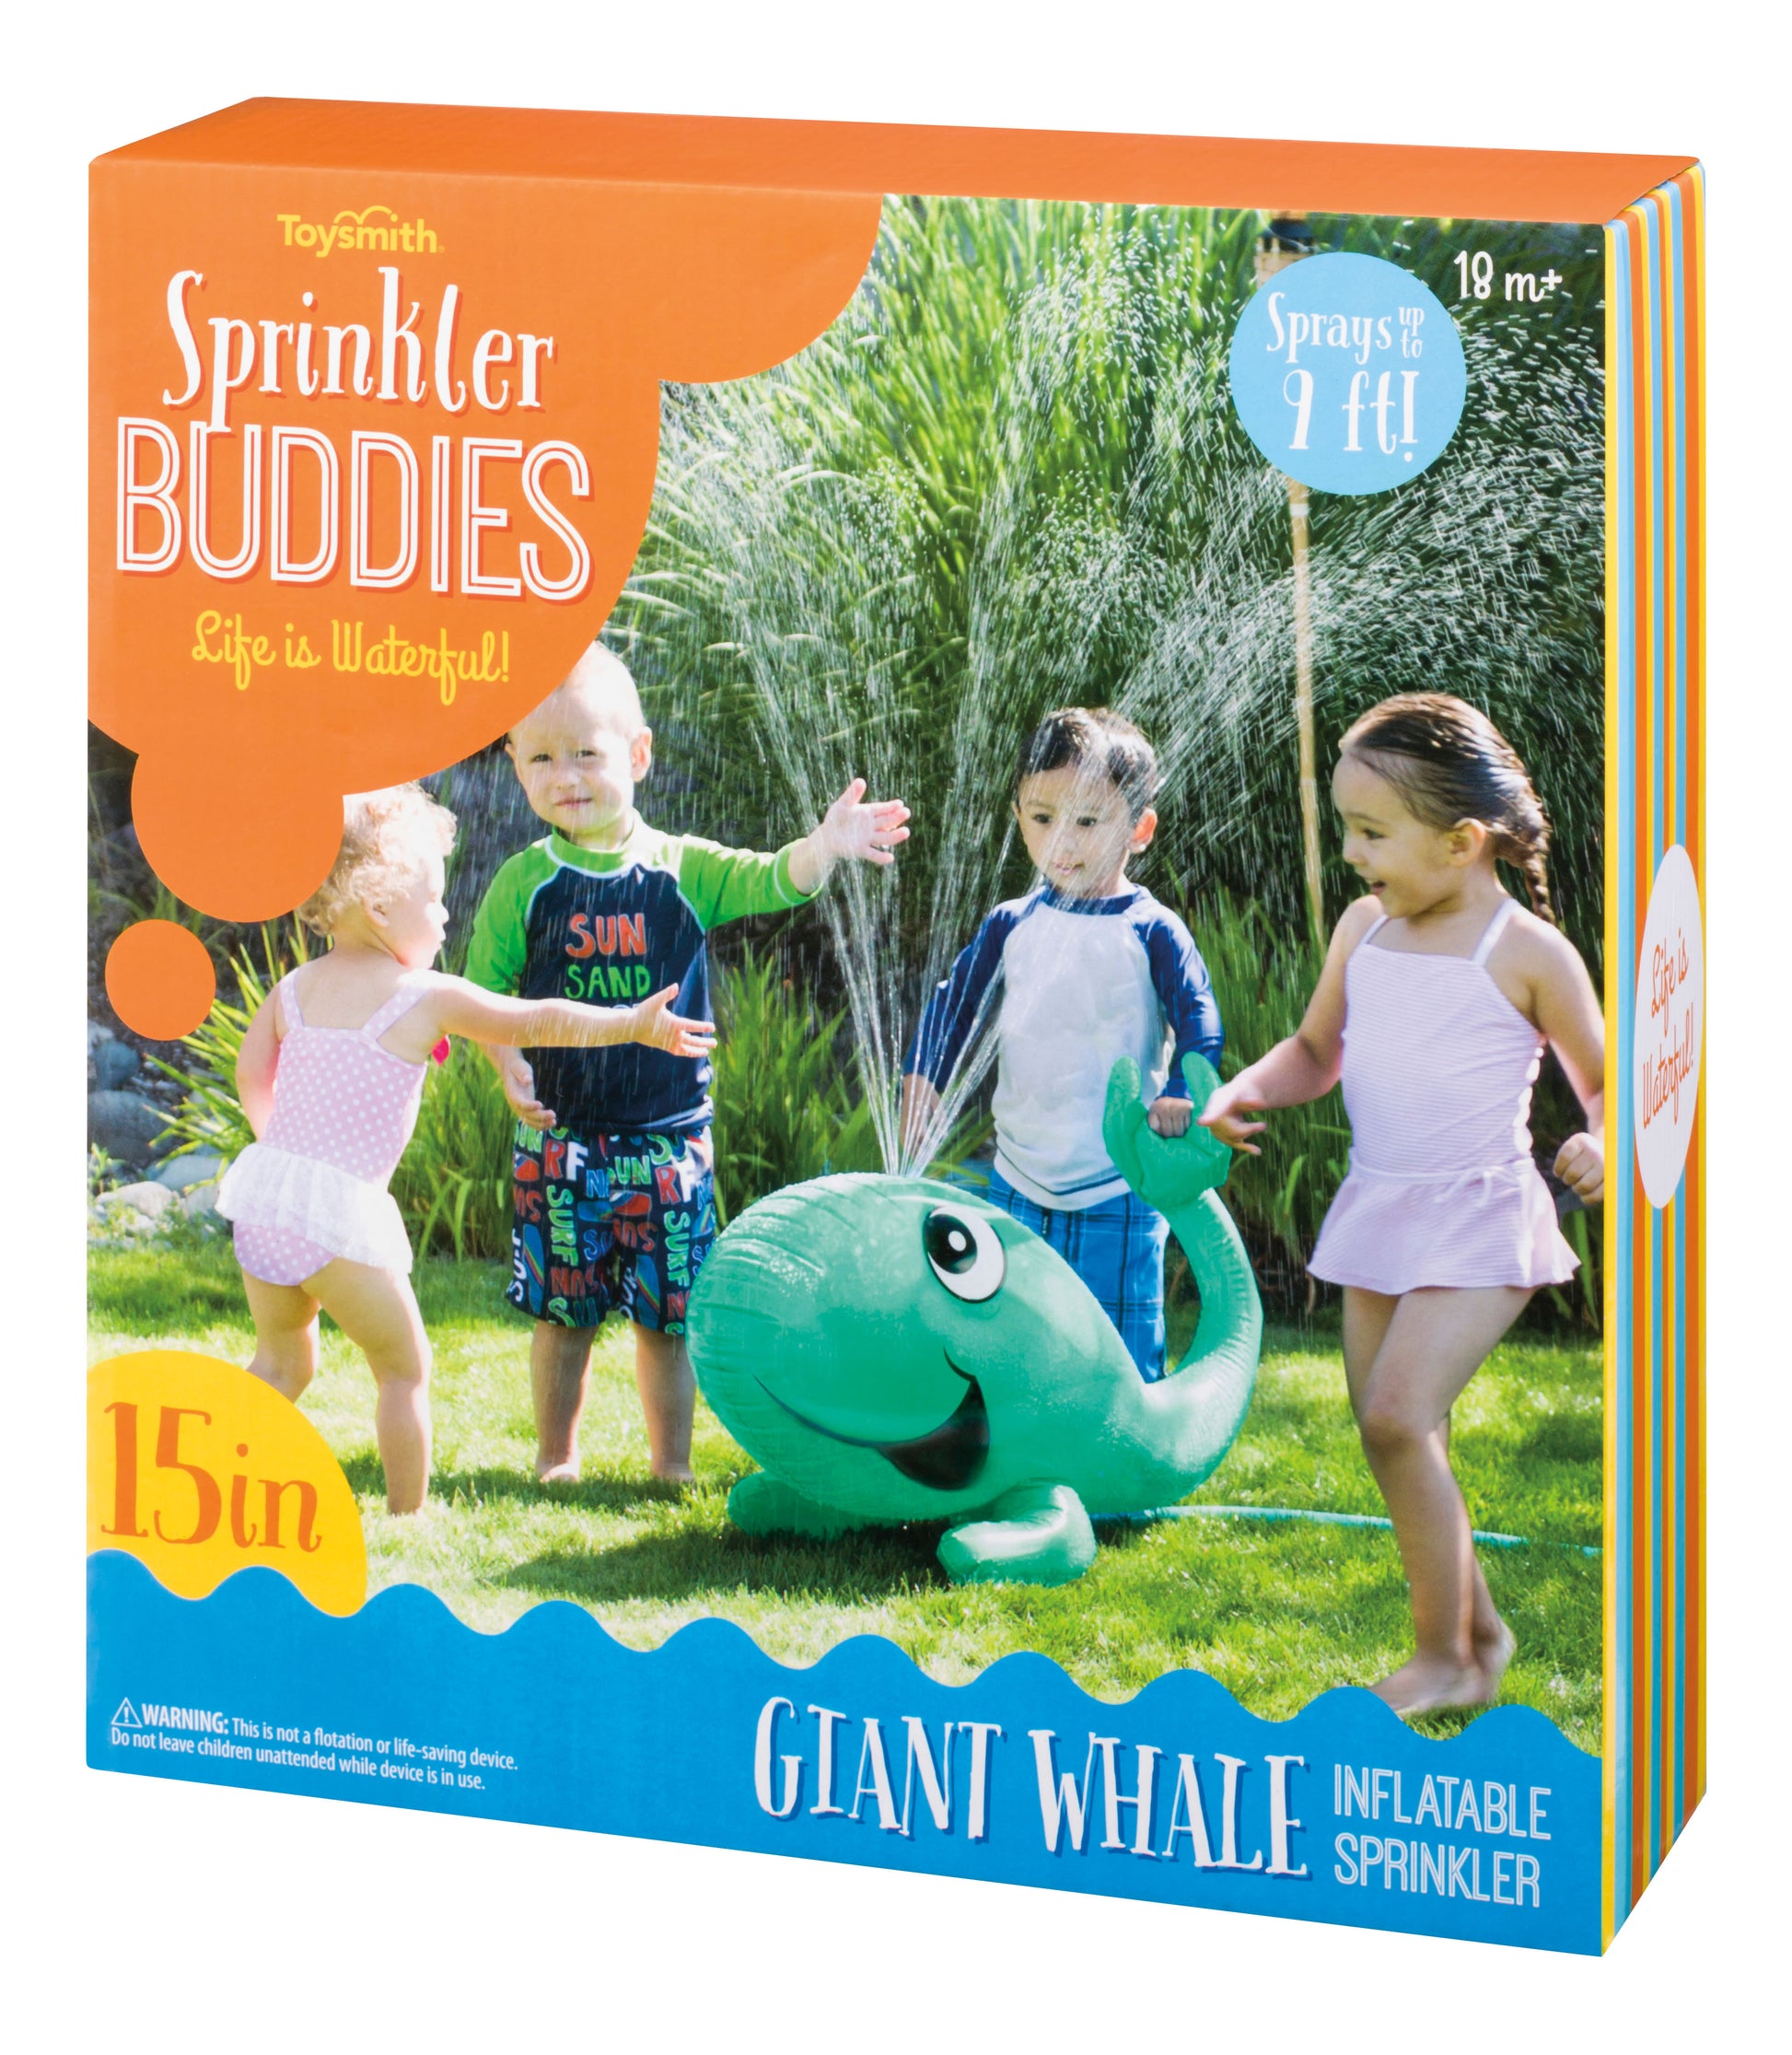 Package of Sprinkler Buddies Giant Whale showing children playing